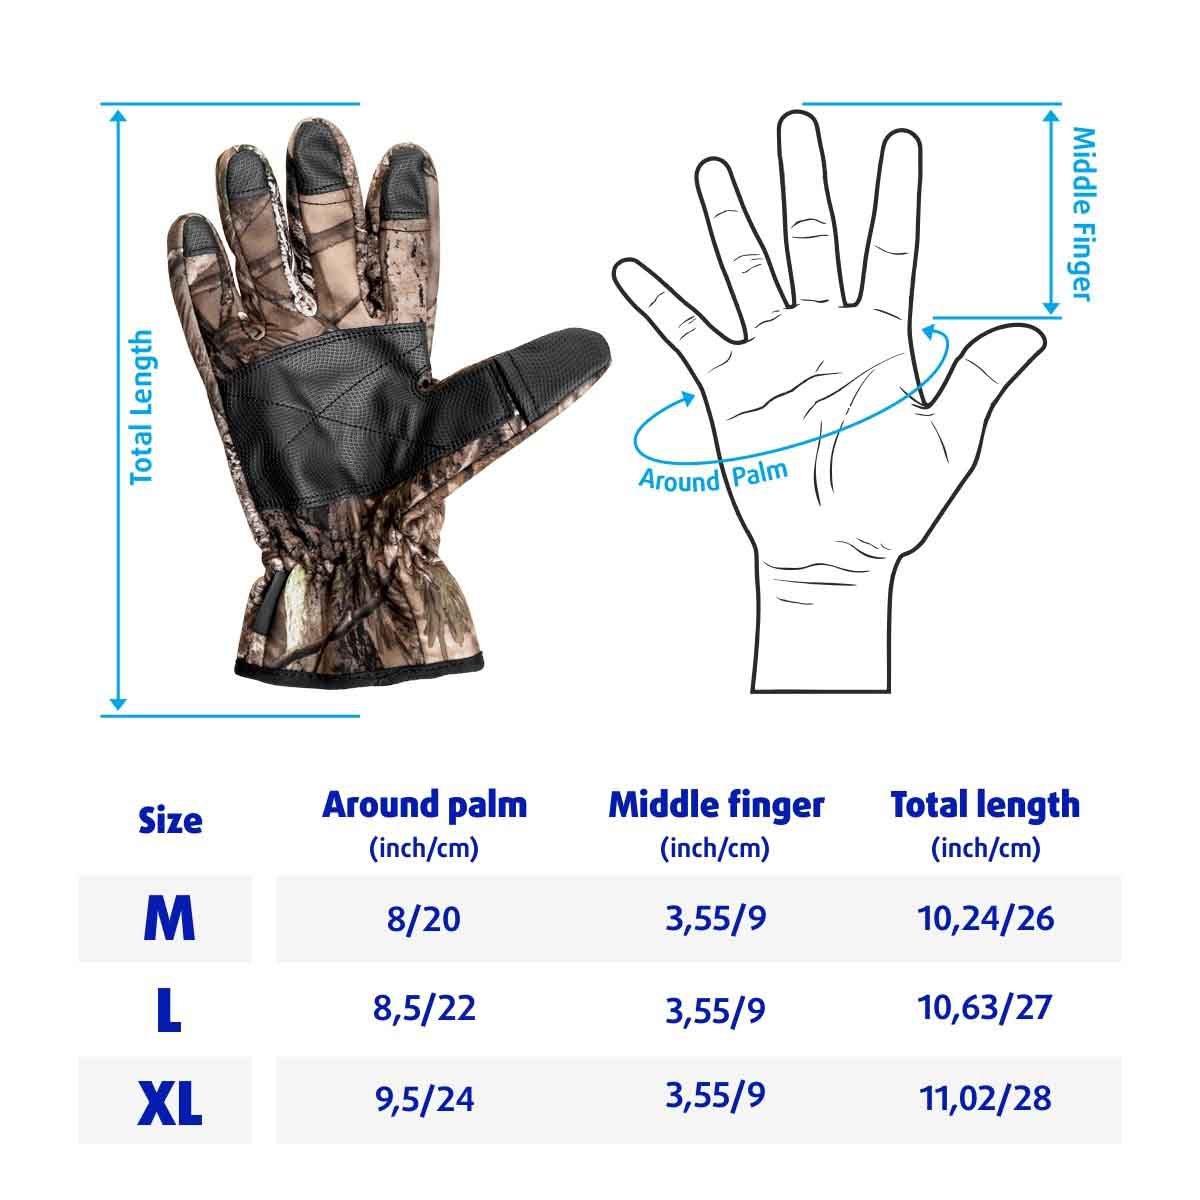 Microfleece Insulated Waterproof Slit Finger Gloves for Men are available in M, L and XL sizes